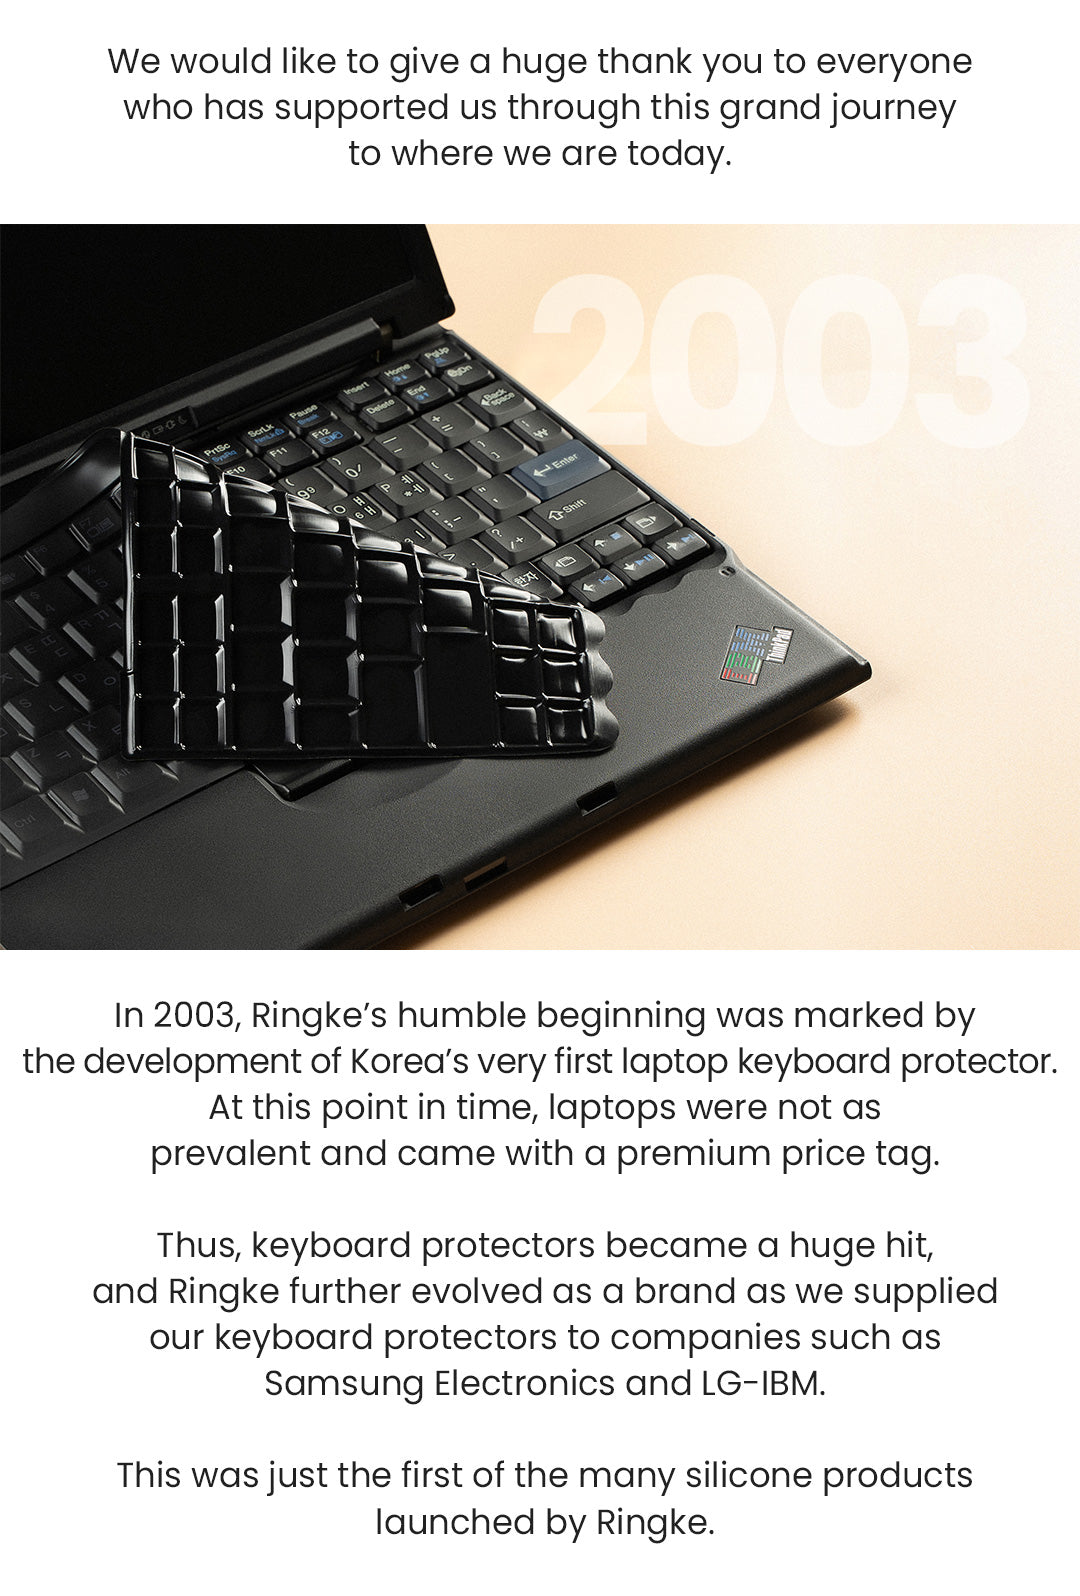 We would like to give a huge thank you to everyone who has supported us through this grand journey to where we are today. In 2003, Ringke's humble beginning was marked by the development of Korea's very first laptop keyboard protector. At this point in time, laptops were not as prevalent and came with a premium price tag. Thus, keyboard protectors became a huge hit, and Ringke further evolved as a brand as we supplied our keyboard protectors such as Samsung Electronics and LG-IBM. This was just the first of the many silicone products launched by Ringke.